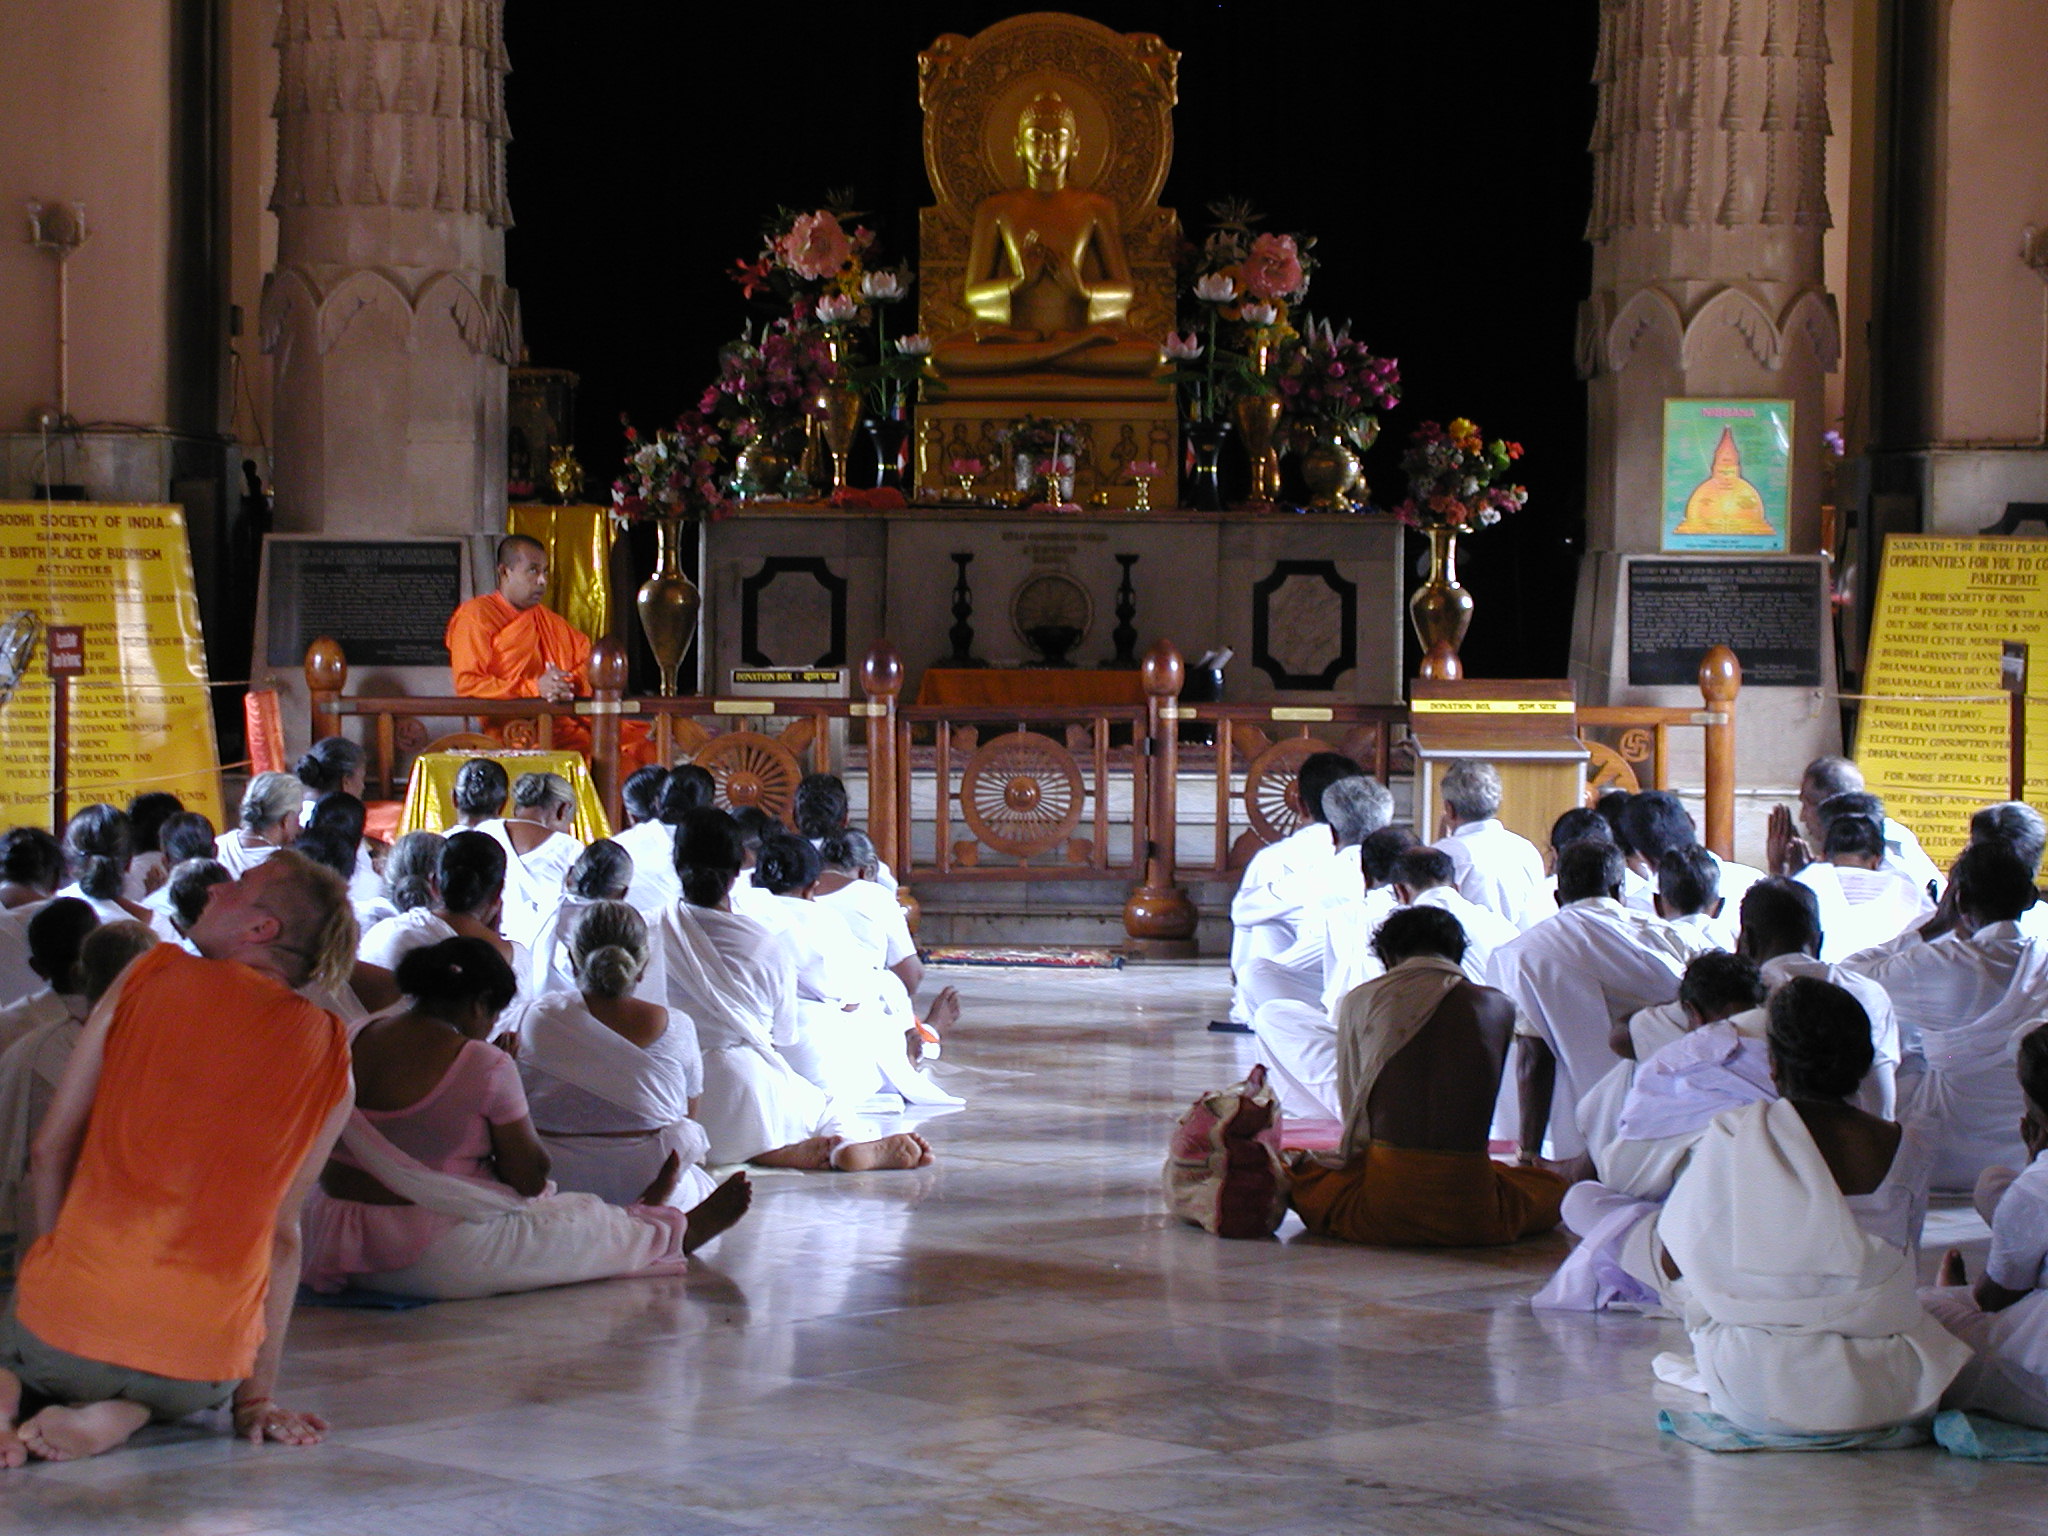 People worshiping in a Buddhist temple 